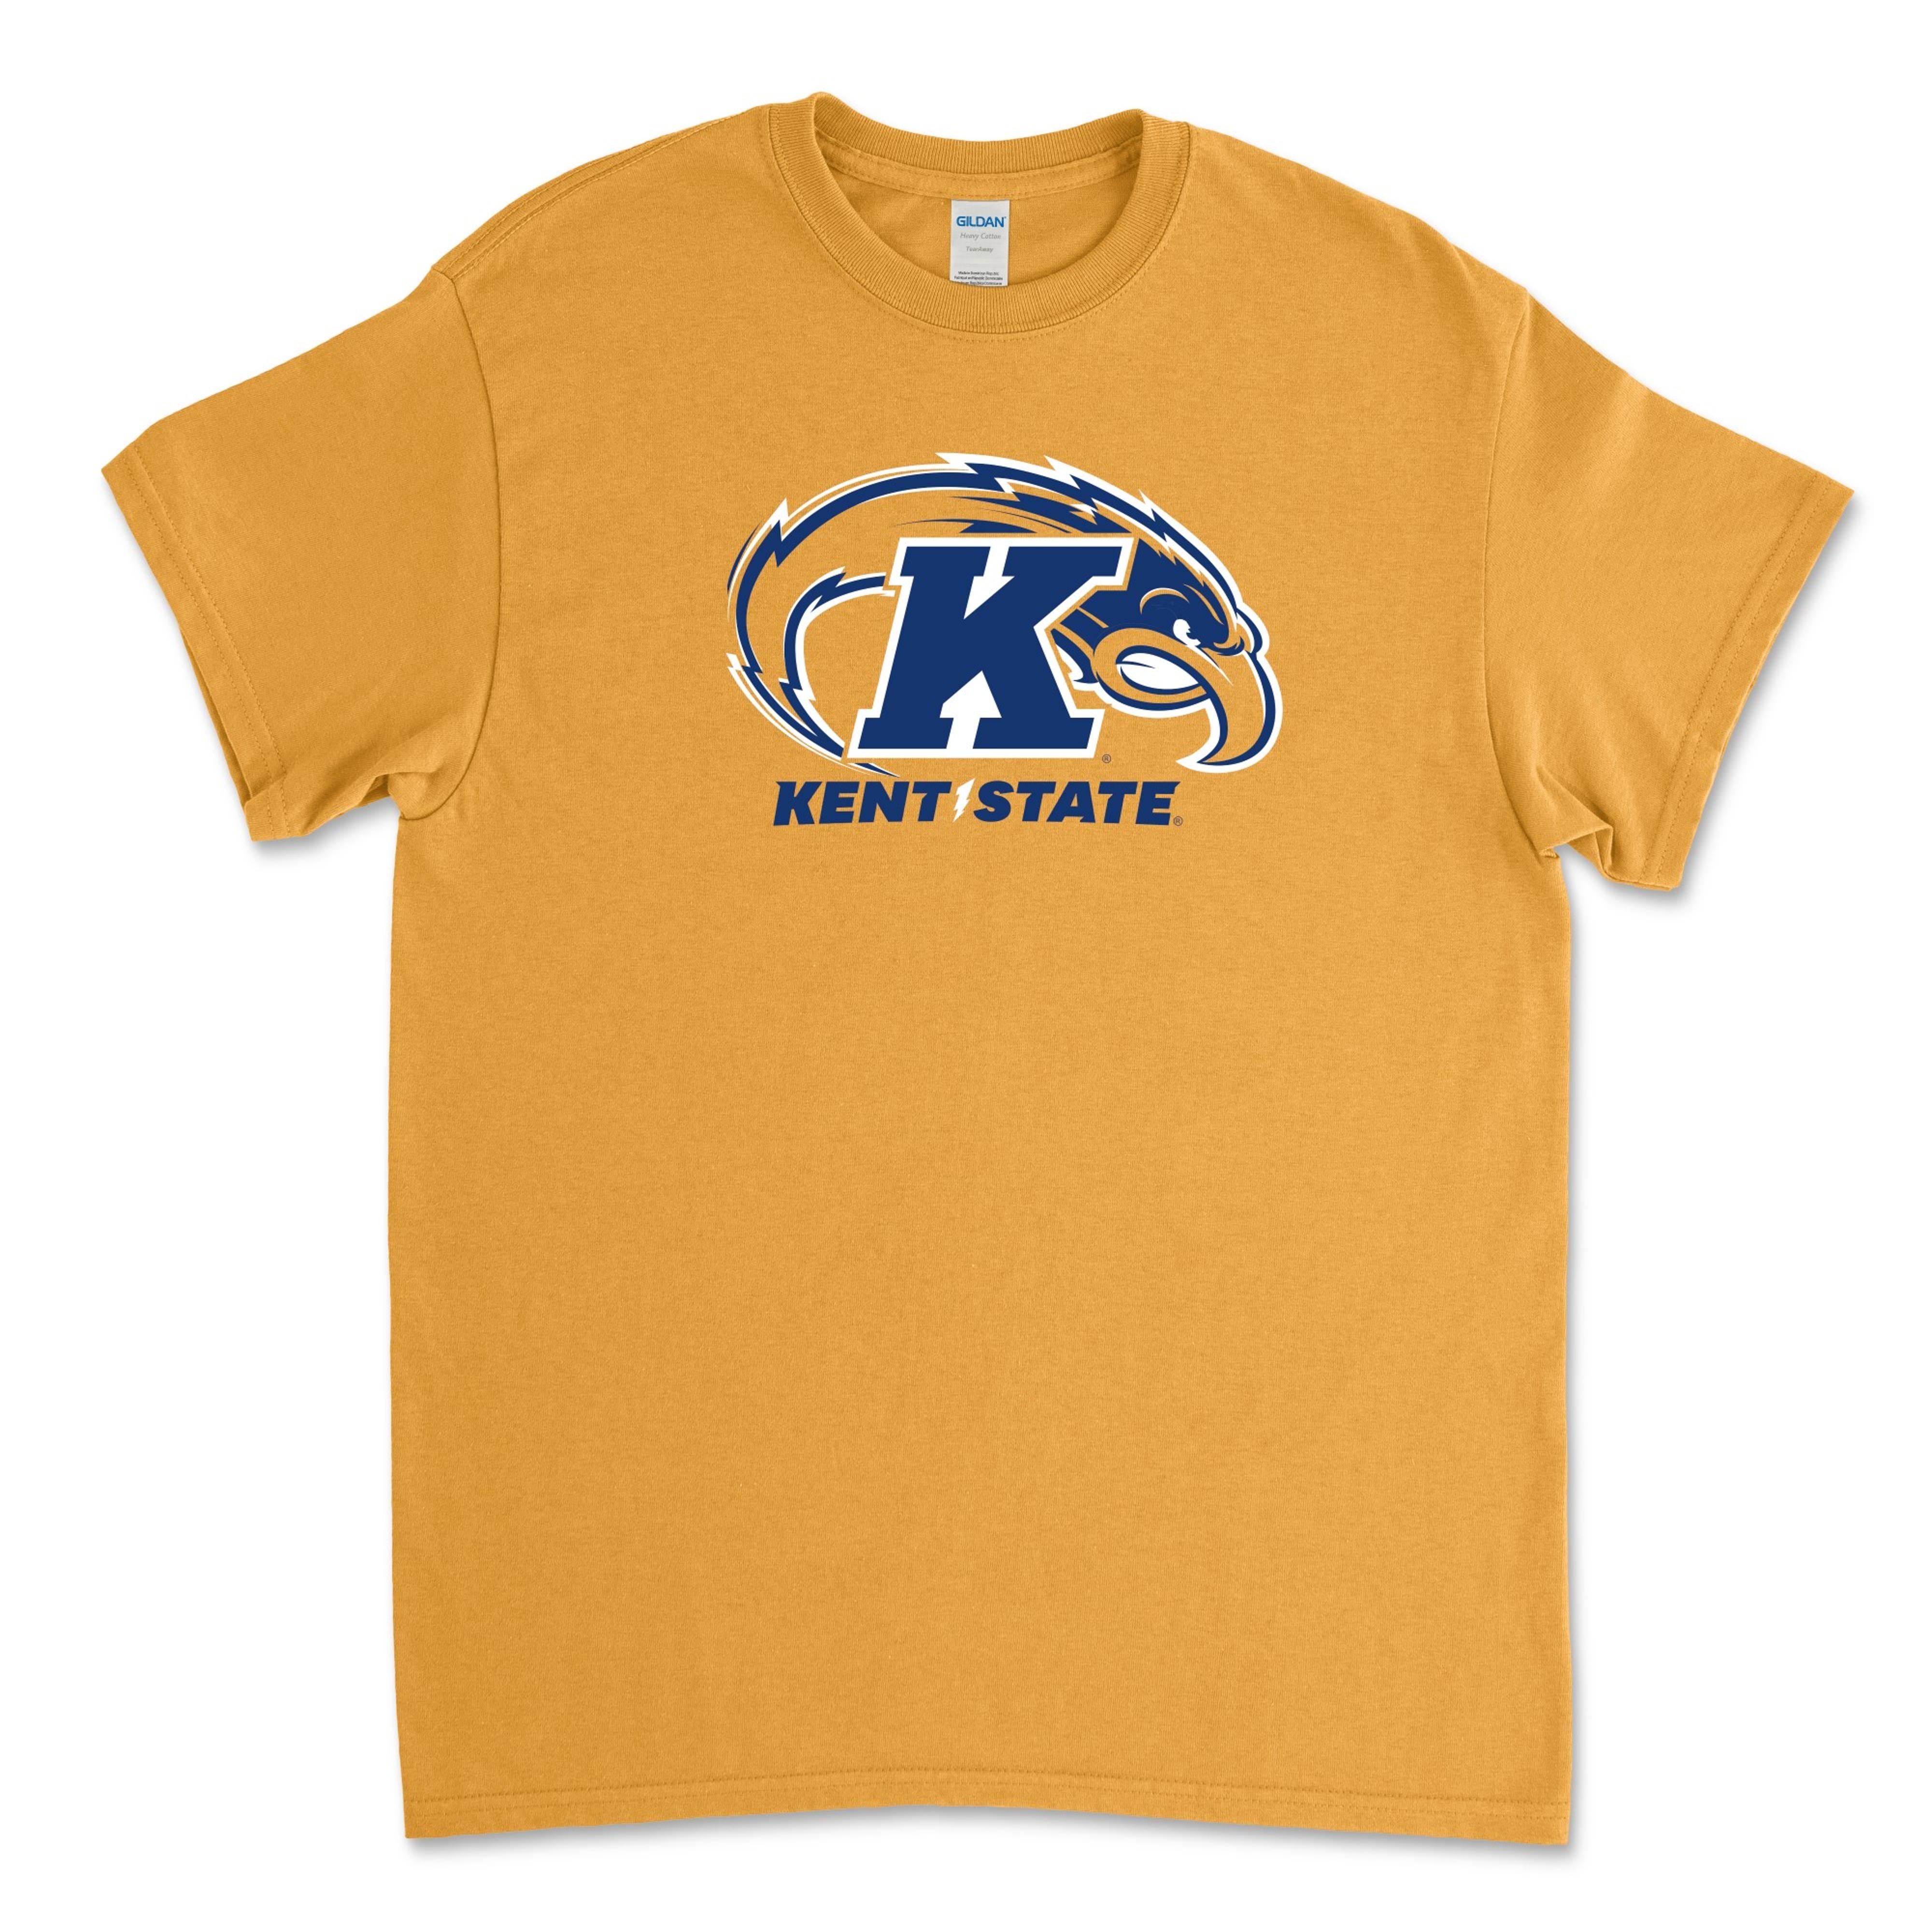 Kent State Gold Youth T-Shirt